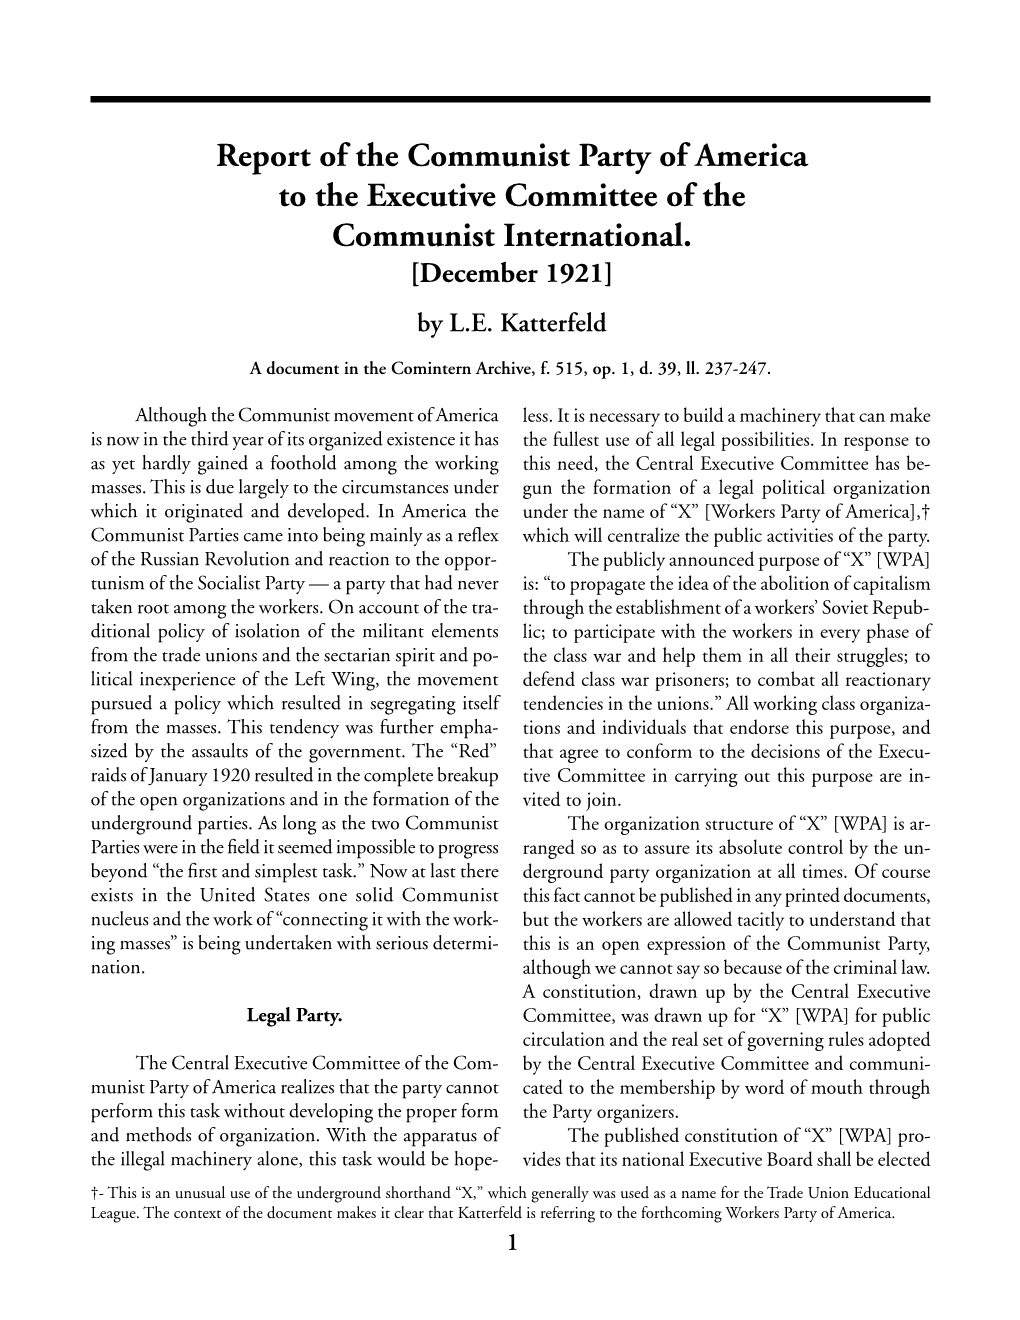 Report of the Communist Party of America to the Executive Committee of the Communist International